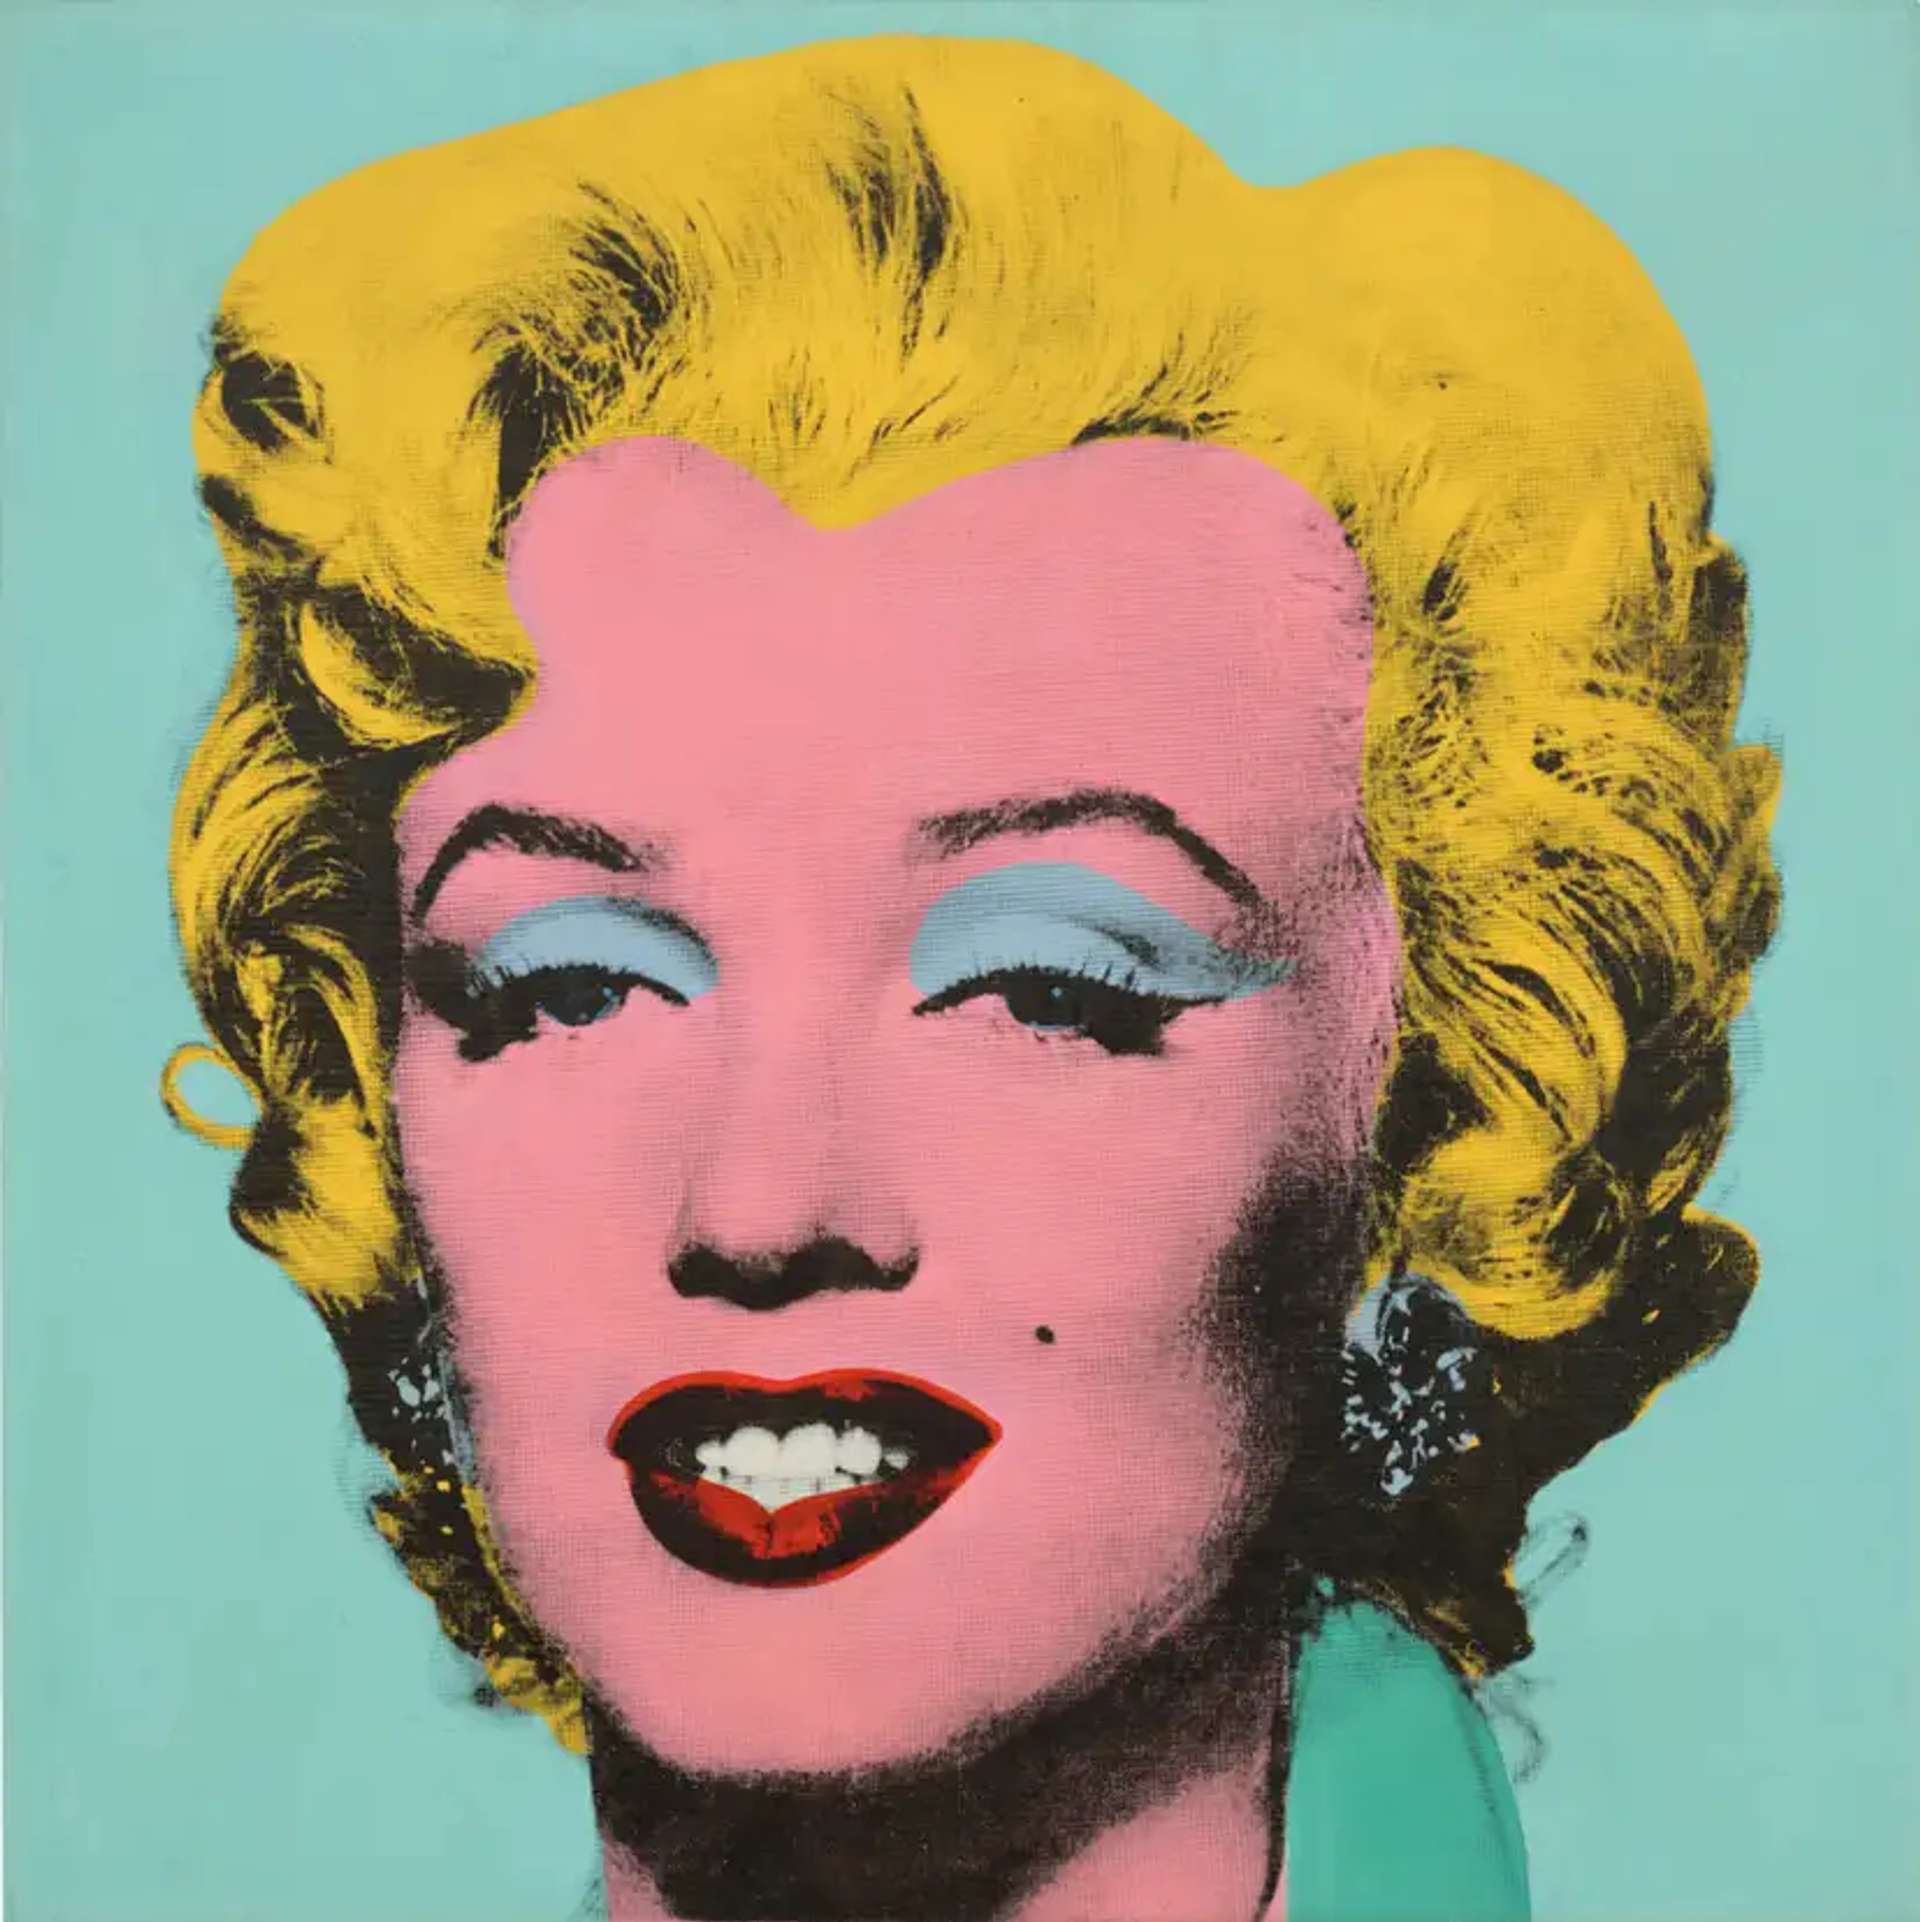 Vibrant coloured print of Marilyn Monroe. She is depicted with a rosy face, against a turquoise background. Her hair is bright yellow, offset by her blue eyeshadow and her red lips.